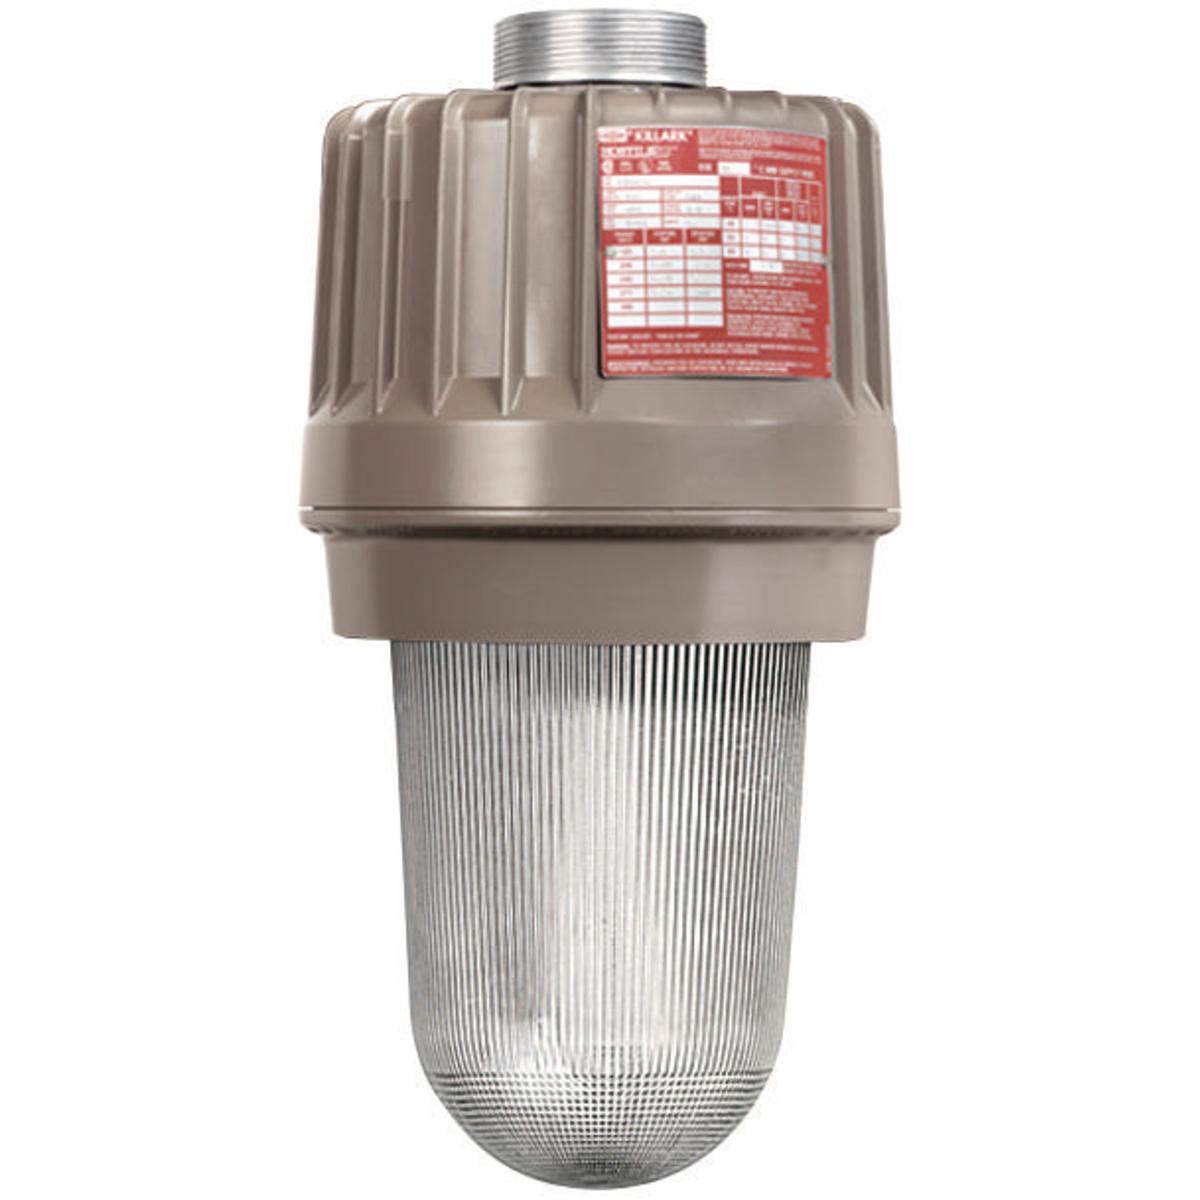 Hubbell EZS250-BP HID 250W Quadri-Volt High Pressure Sodium with Ballast Protection  ; Three light sources – High Pressure Sodium (50-400W), Metal Halide (70-400W) and Pulse Start Metal Halide (175-400W) ; Mounting choice –Pendant, ceiling, 25˚ stanchion or 90˚ wall mount,